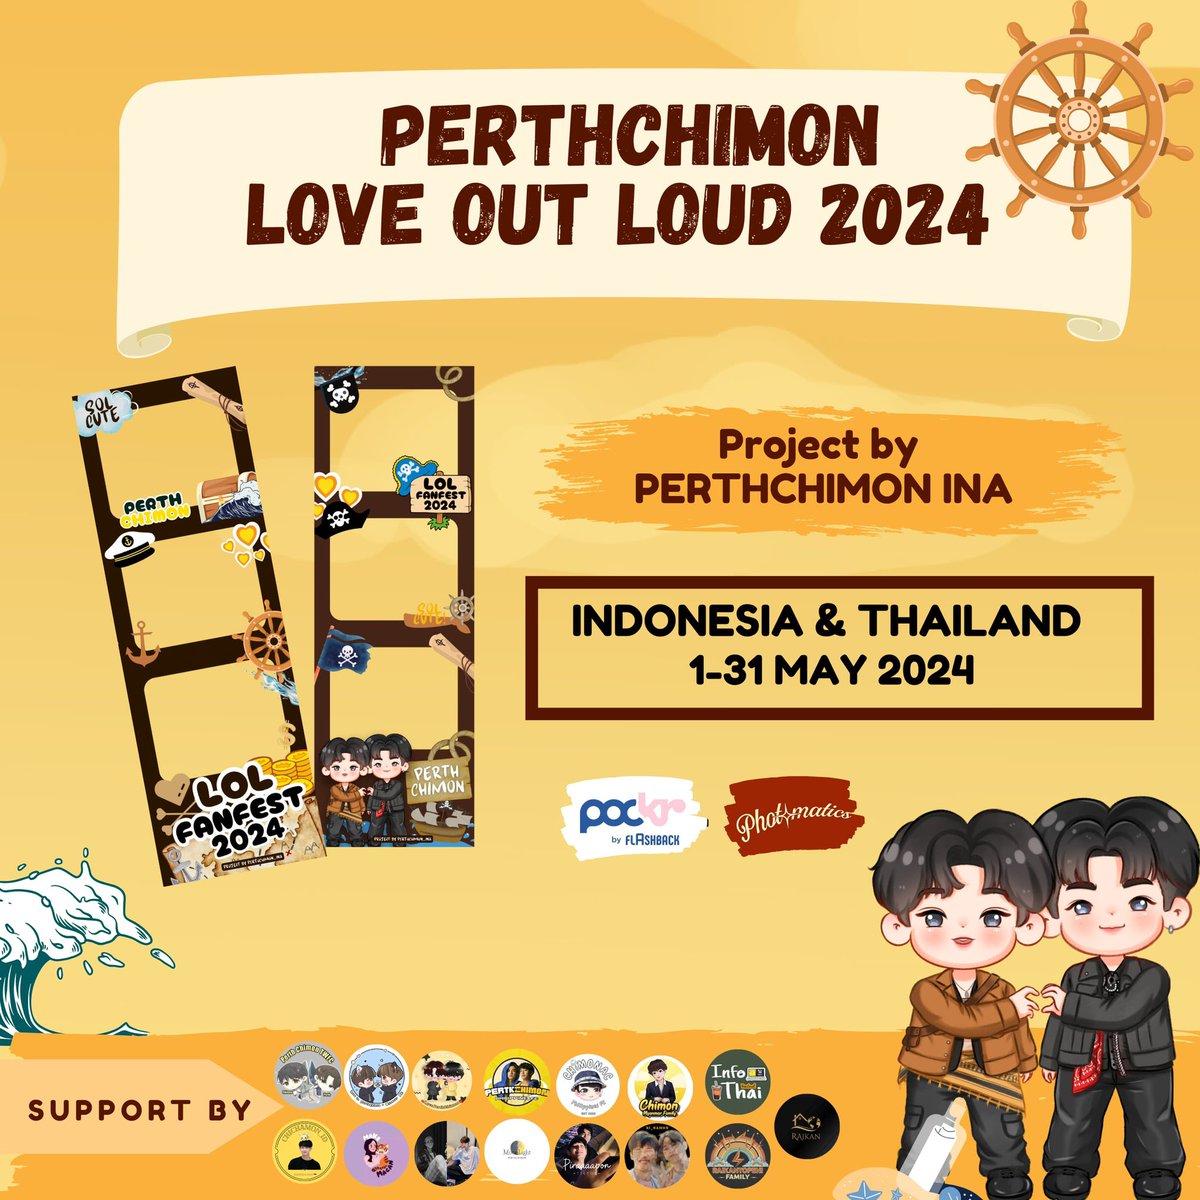 ⚓🖤 Love Out Loud Fanfest 2024 PerthChimon Photobooth Event 💛⚓
Event by: @PERTHCHIMON_INA

For PerthChimon fans in Indonesia & Thailand don't forget to join the Photobooth Project! 

🗓️ 1-31 May 2024
📍 Detail location on poster

#LOLFanFest2024
#PerthTanapon #ChimonWachirawit